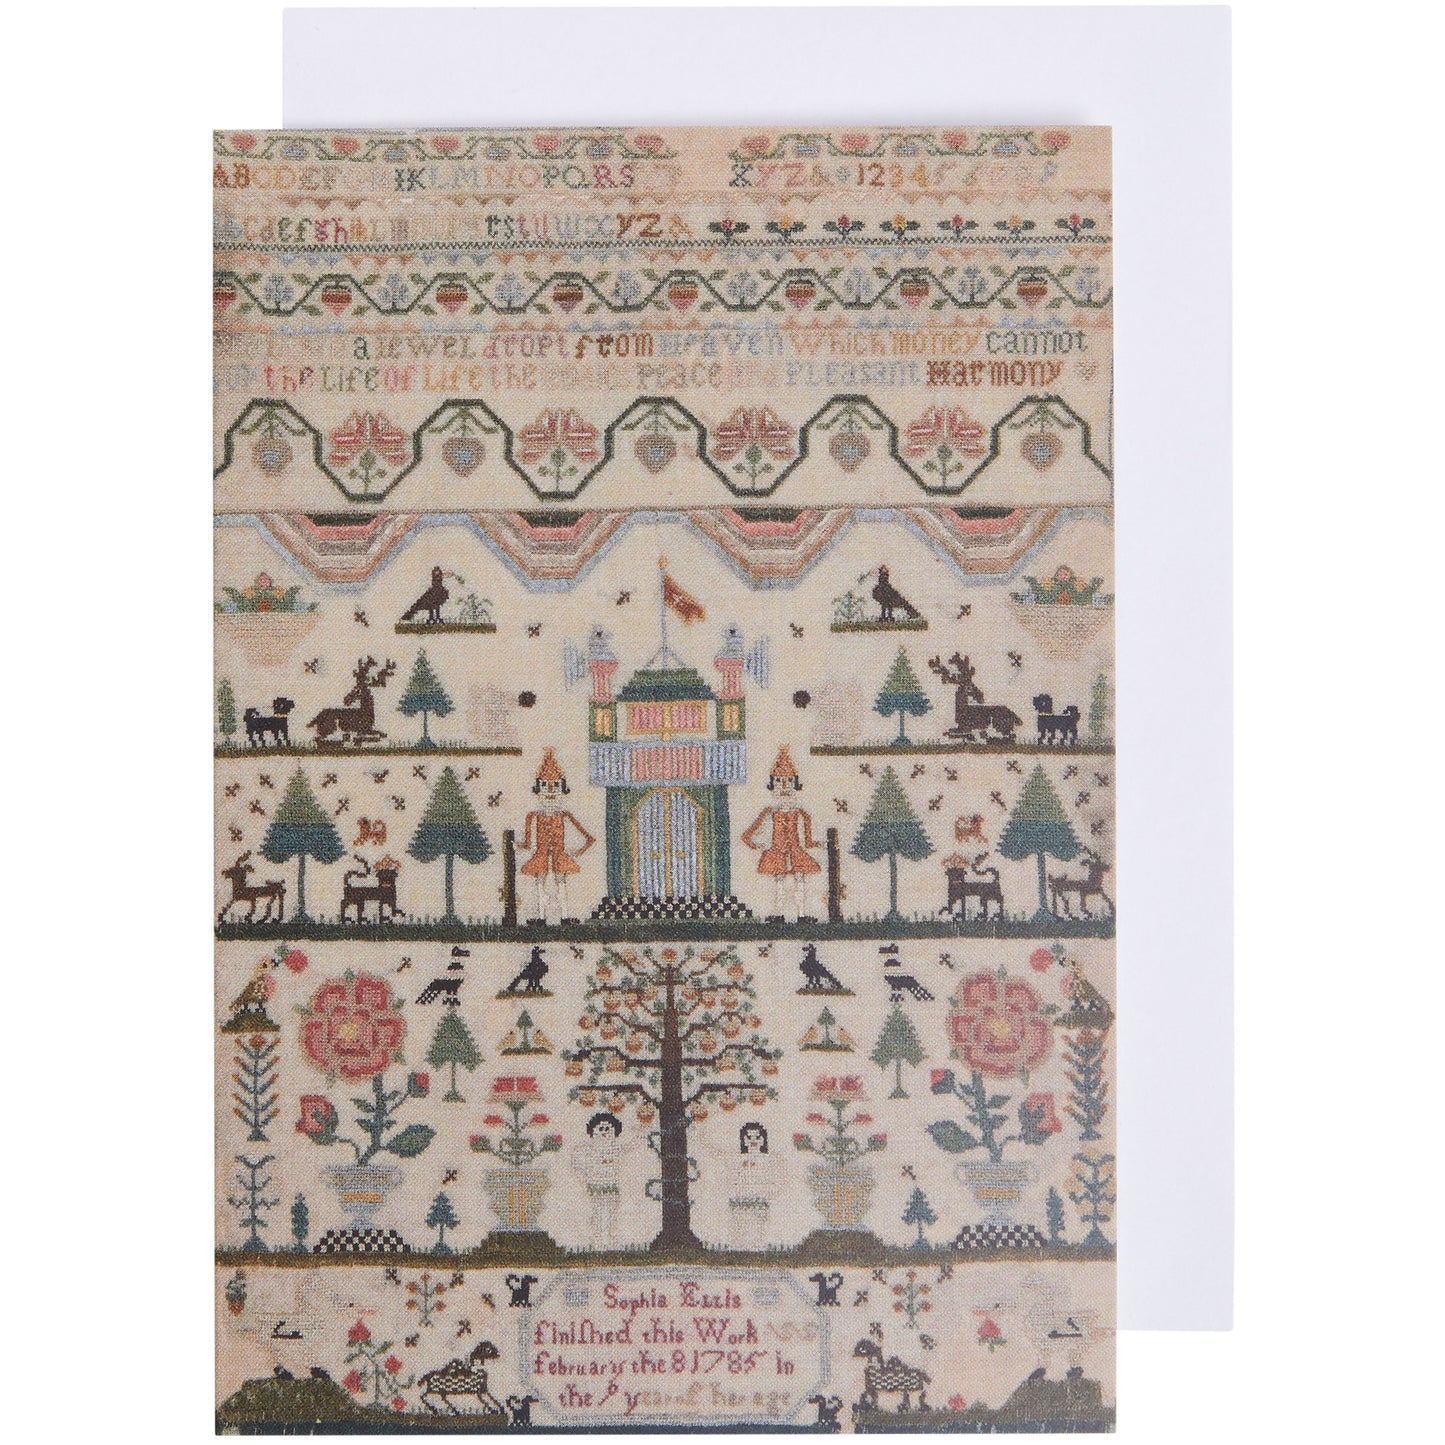 Notelet - band sampler with pictorial panels by Sophia Ellis. From the collection of The Fitzwilliam Museum. 